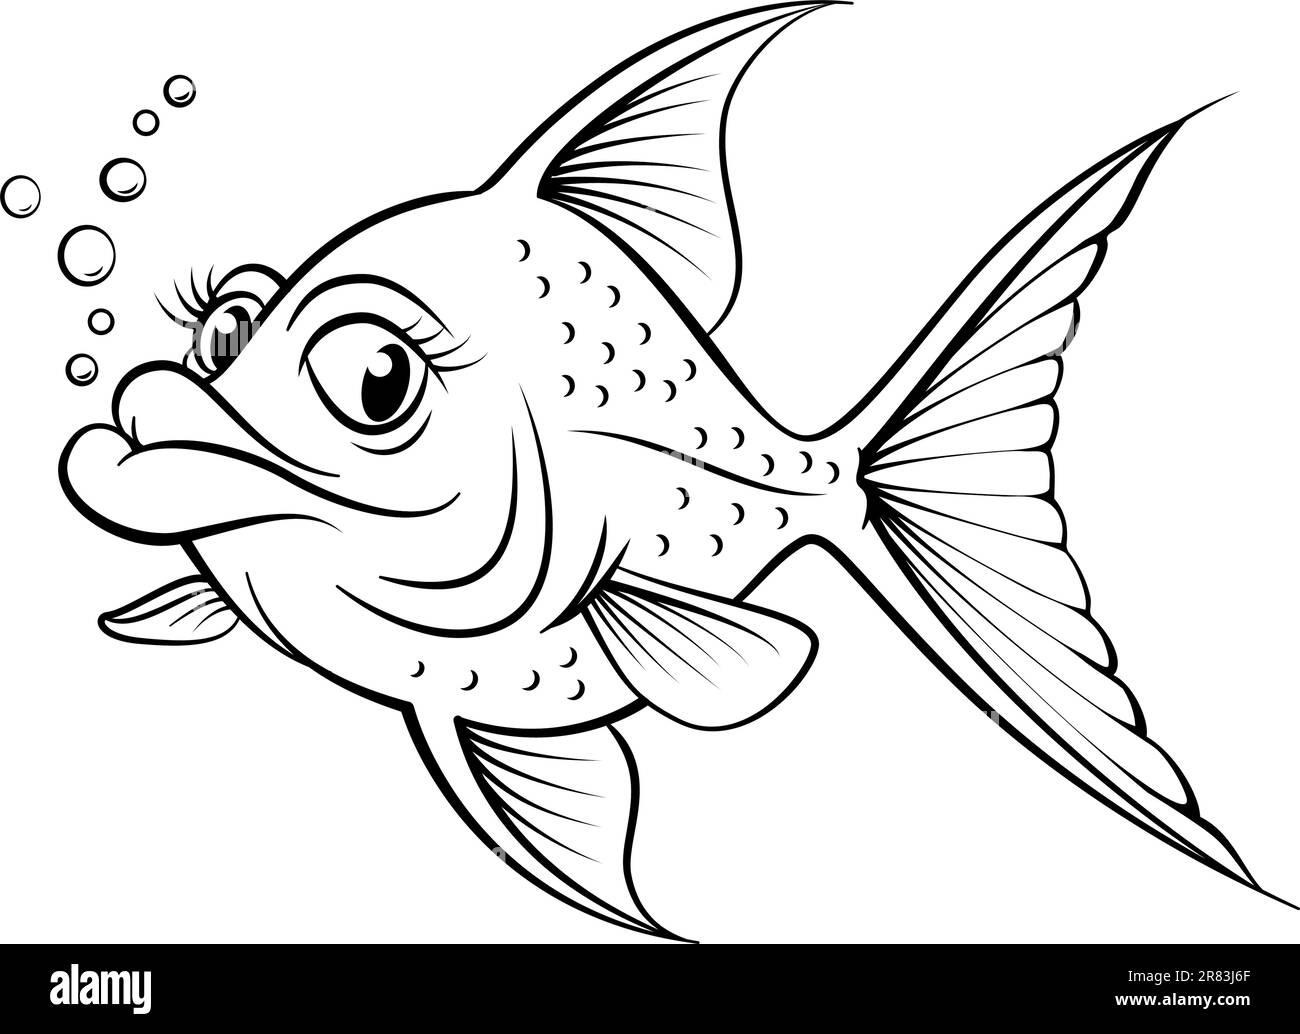 Drawing fish Black and White Stock Photos & Images - Alamy